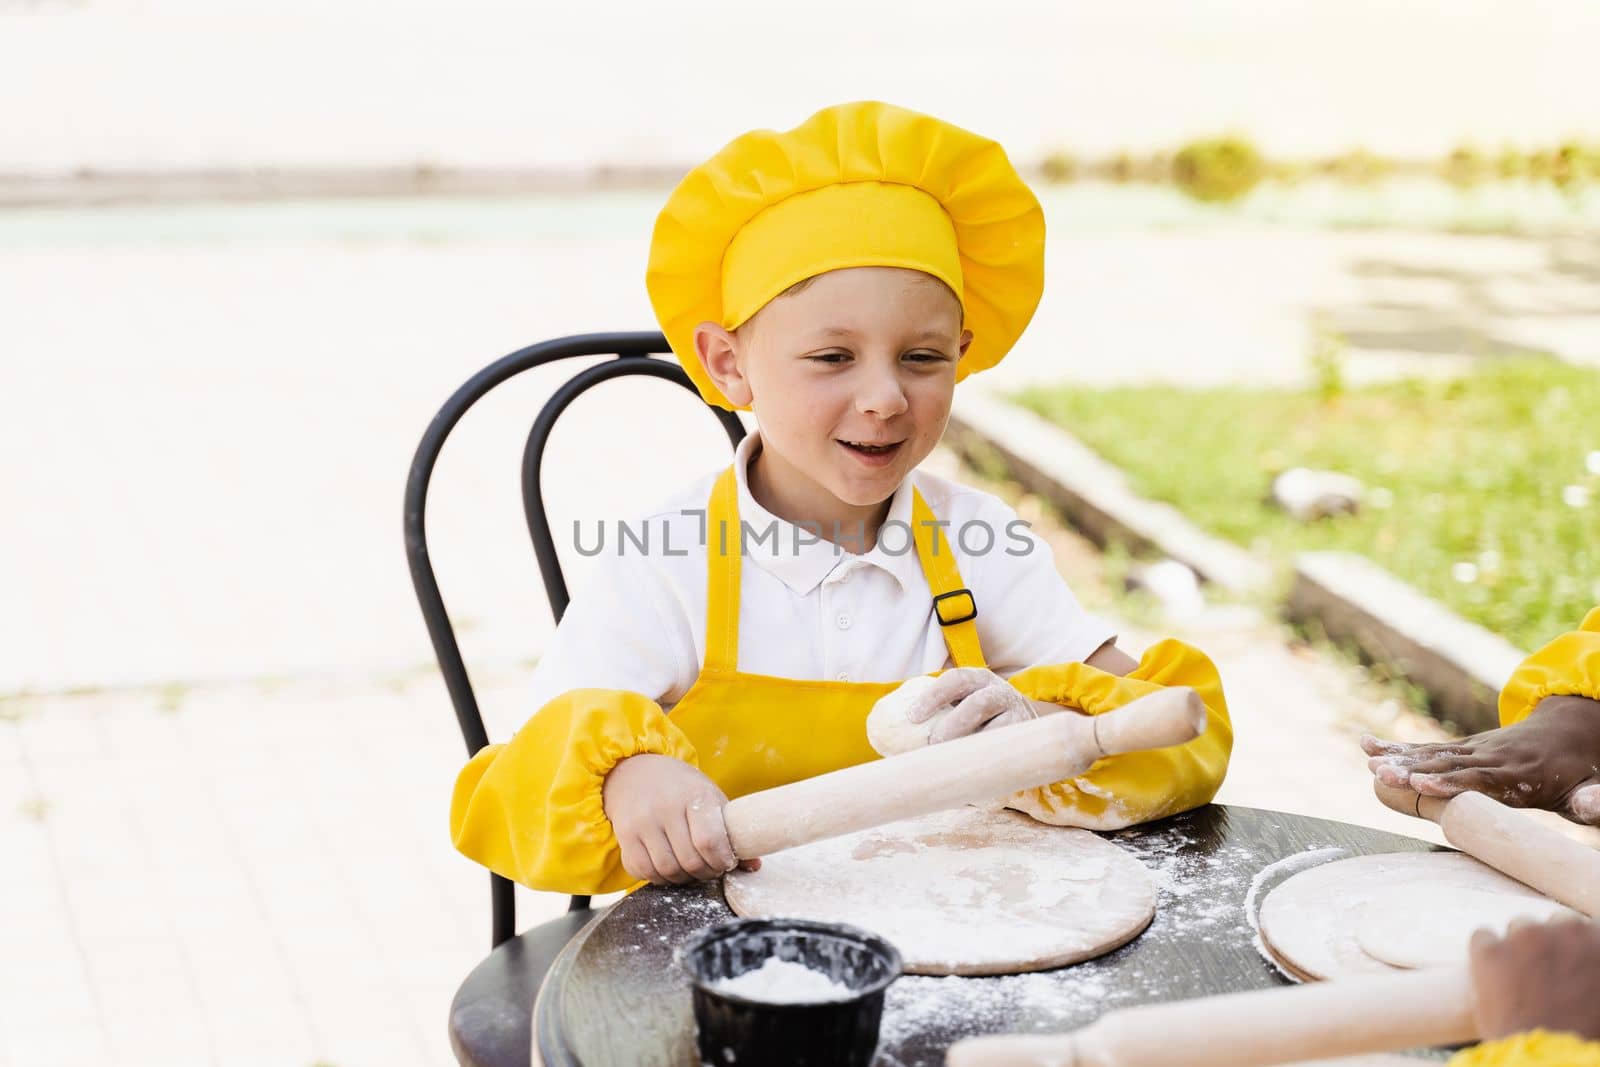 Handsome cook child in yellow chefs hat and apron yellow uniform holding dough roller and cooking dough outdoor